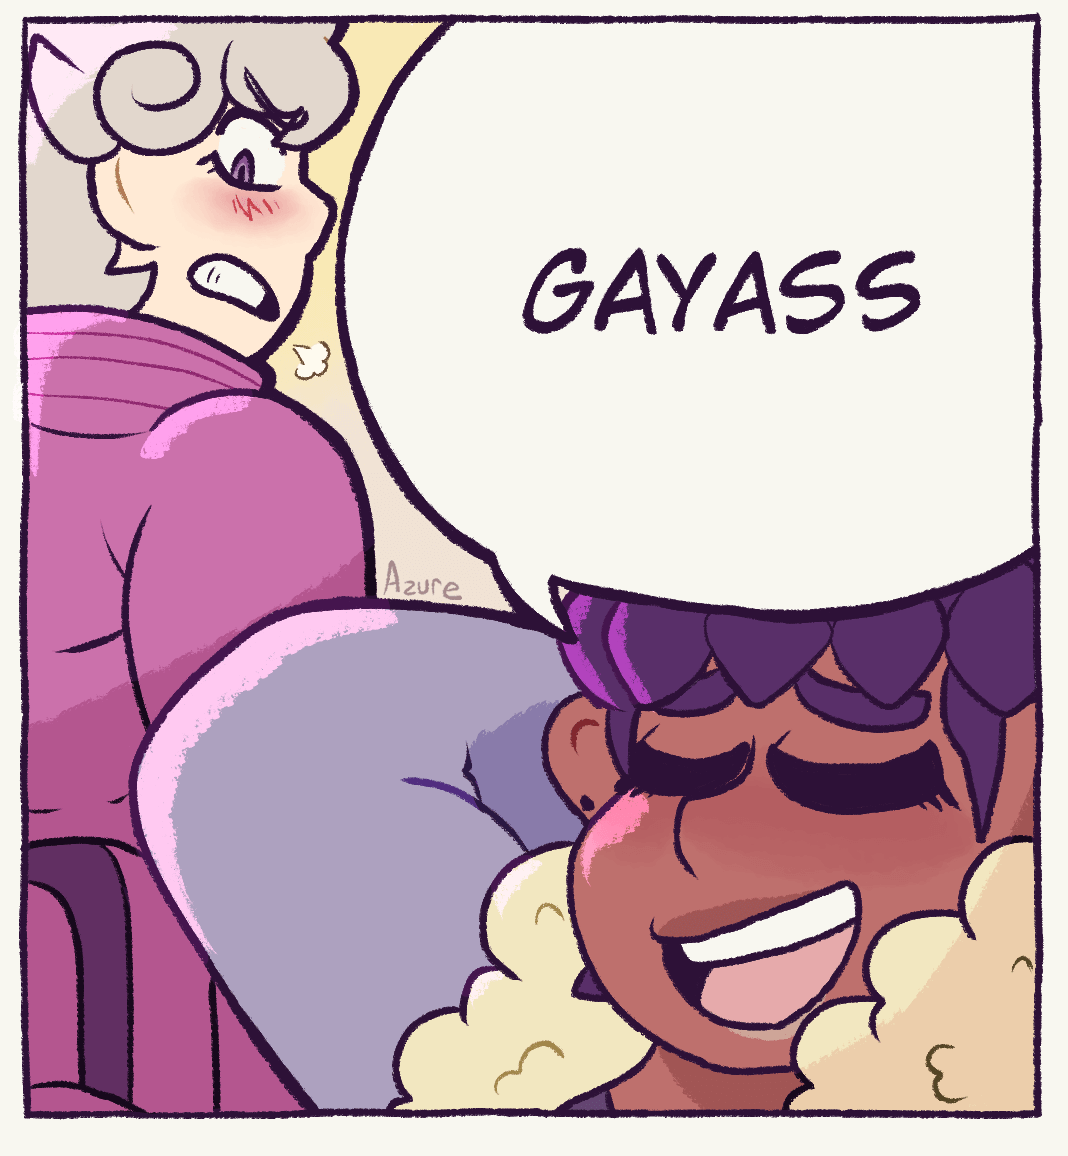 Fanart of Hop and Bede from Pokemon. Hop sits in the forefront, with his hands behind his head, saying, 'Gayass'. Bede is looking over his shoulder angrily.